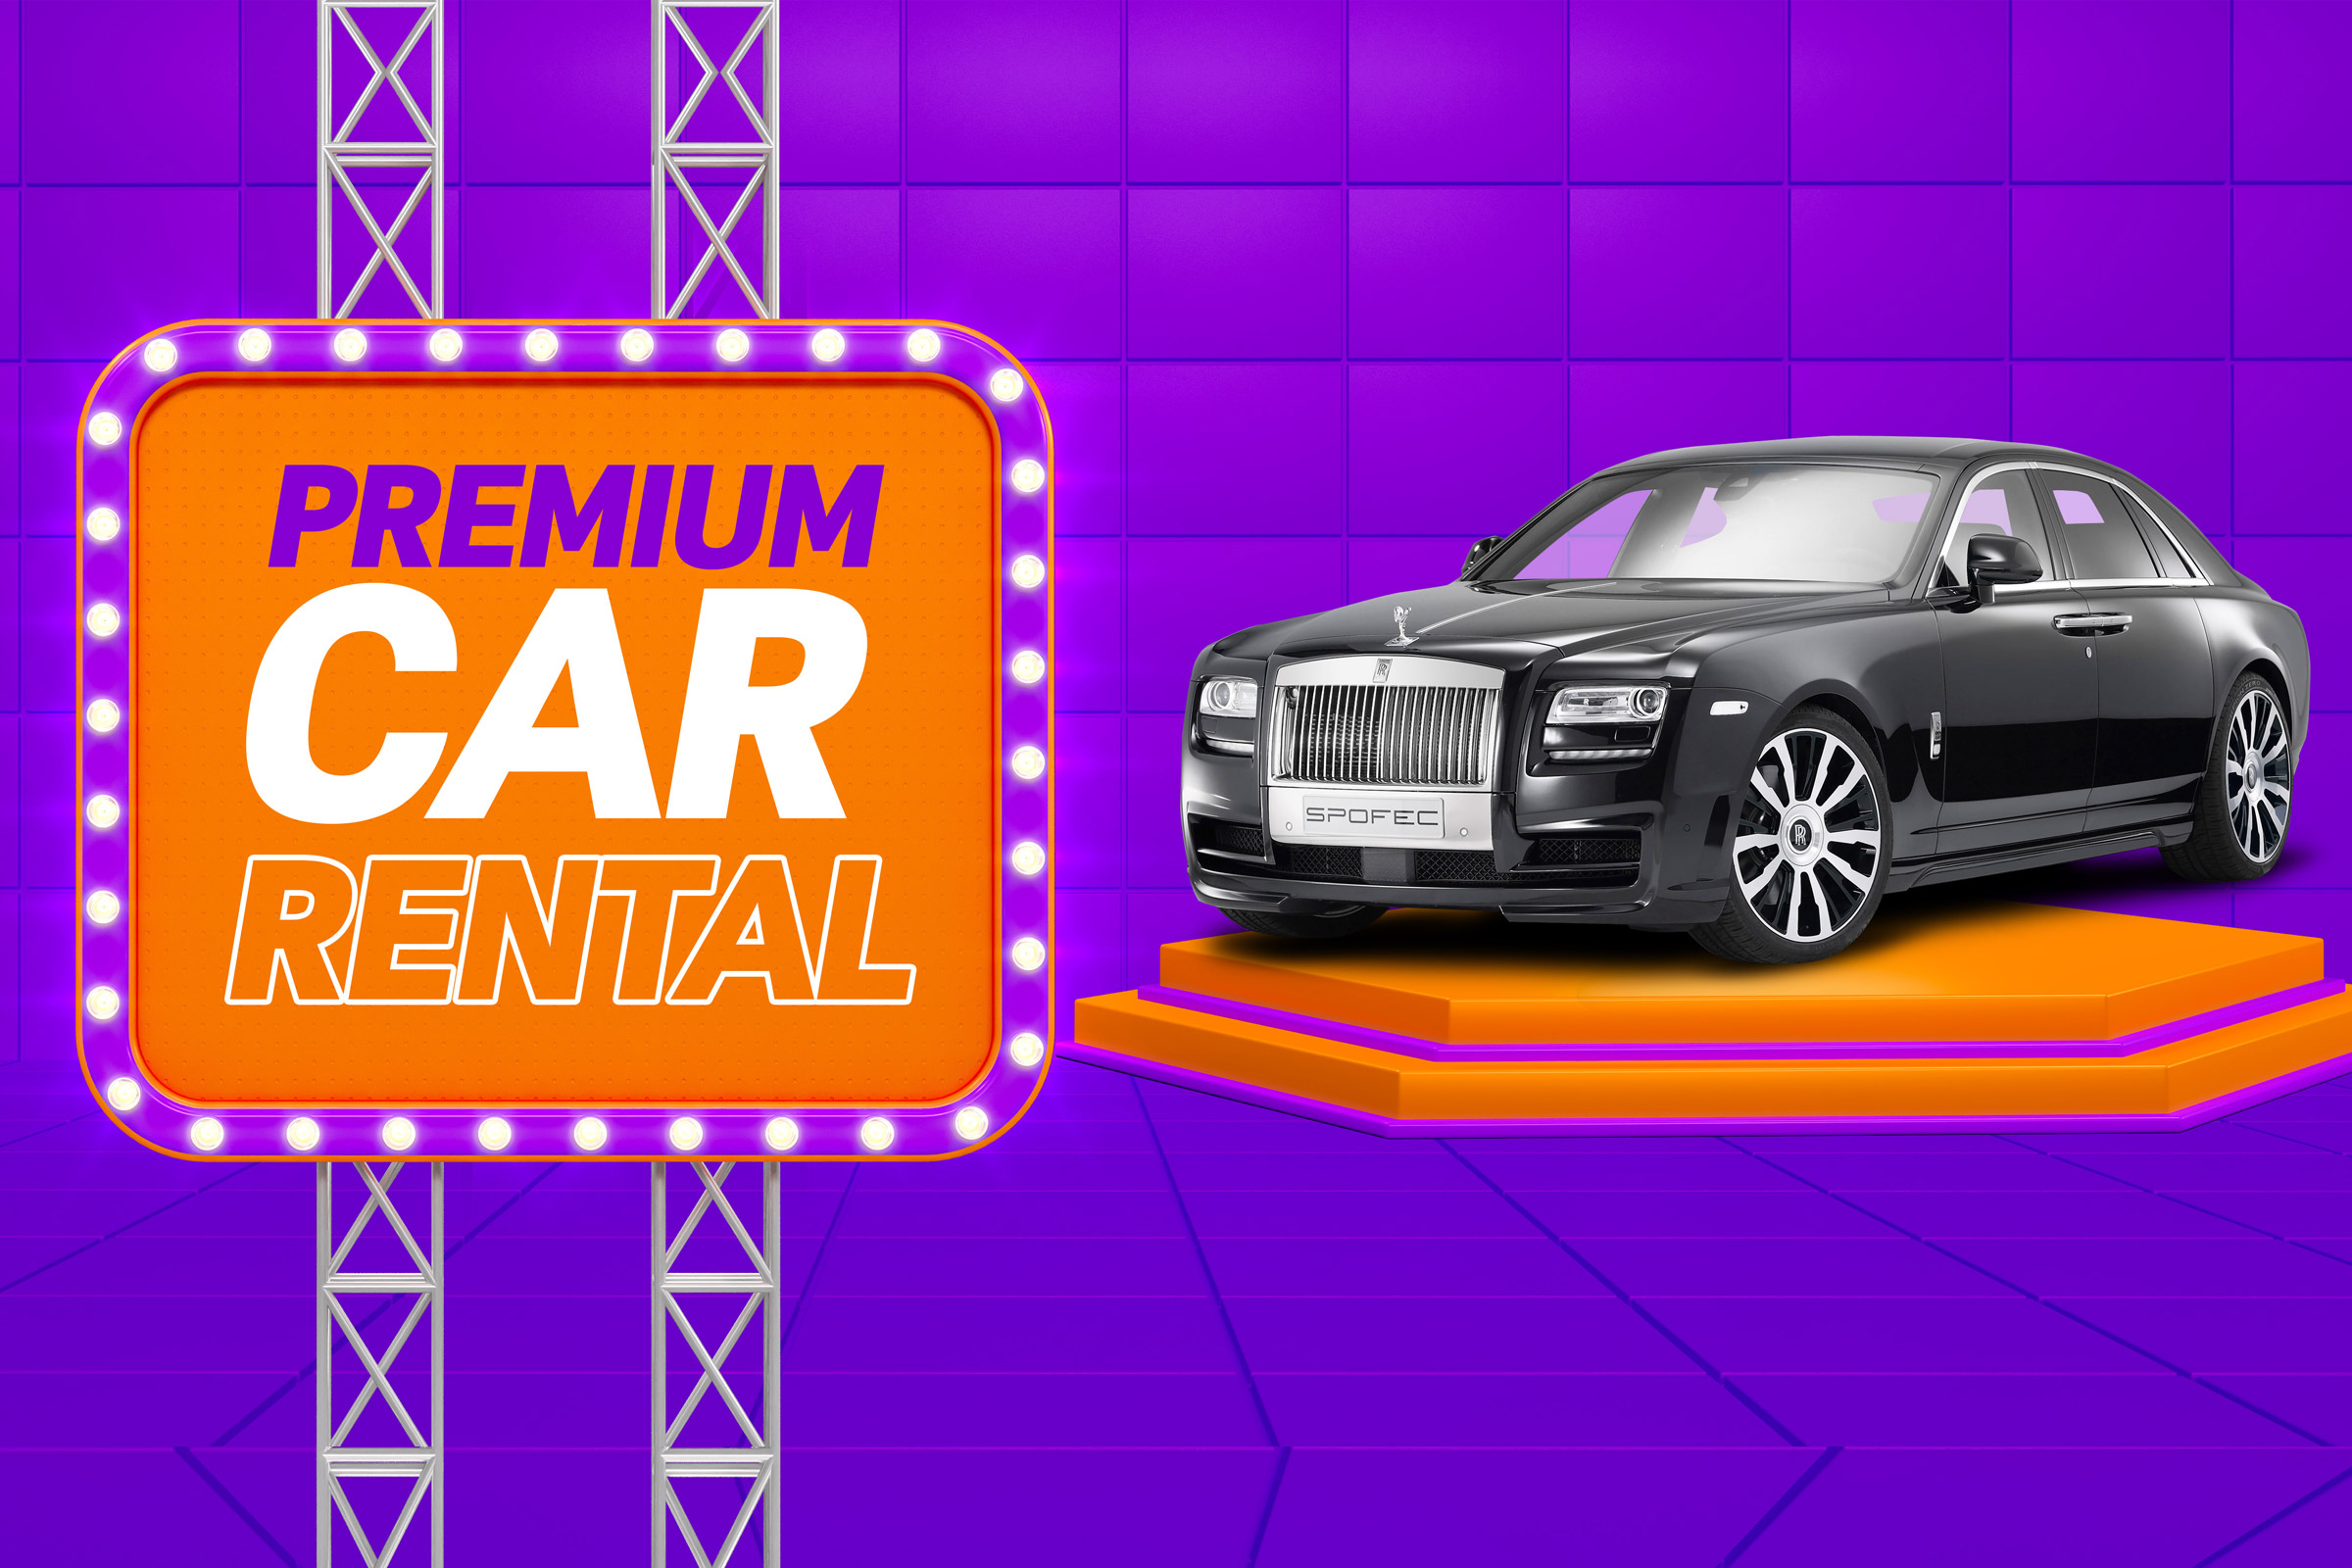 Rentalcars Review: The Best Way To Hire A Car